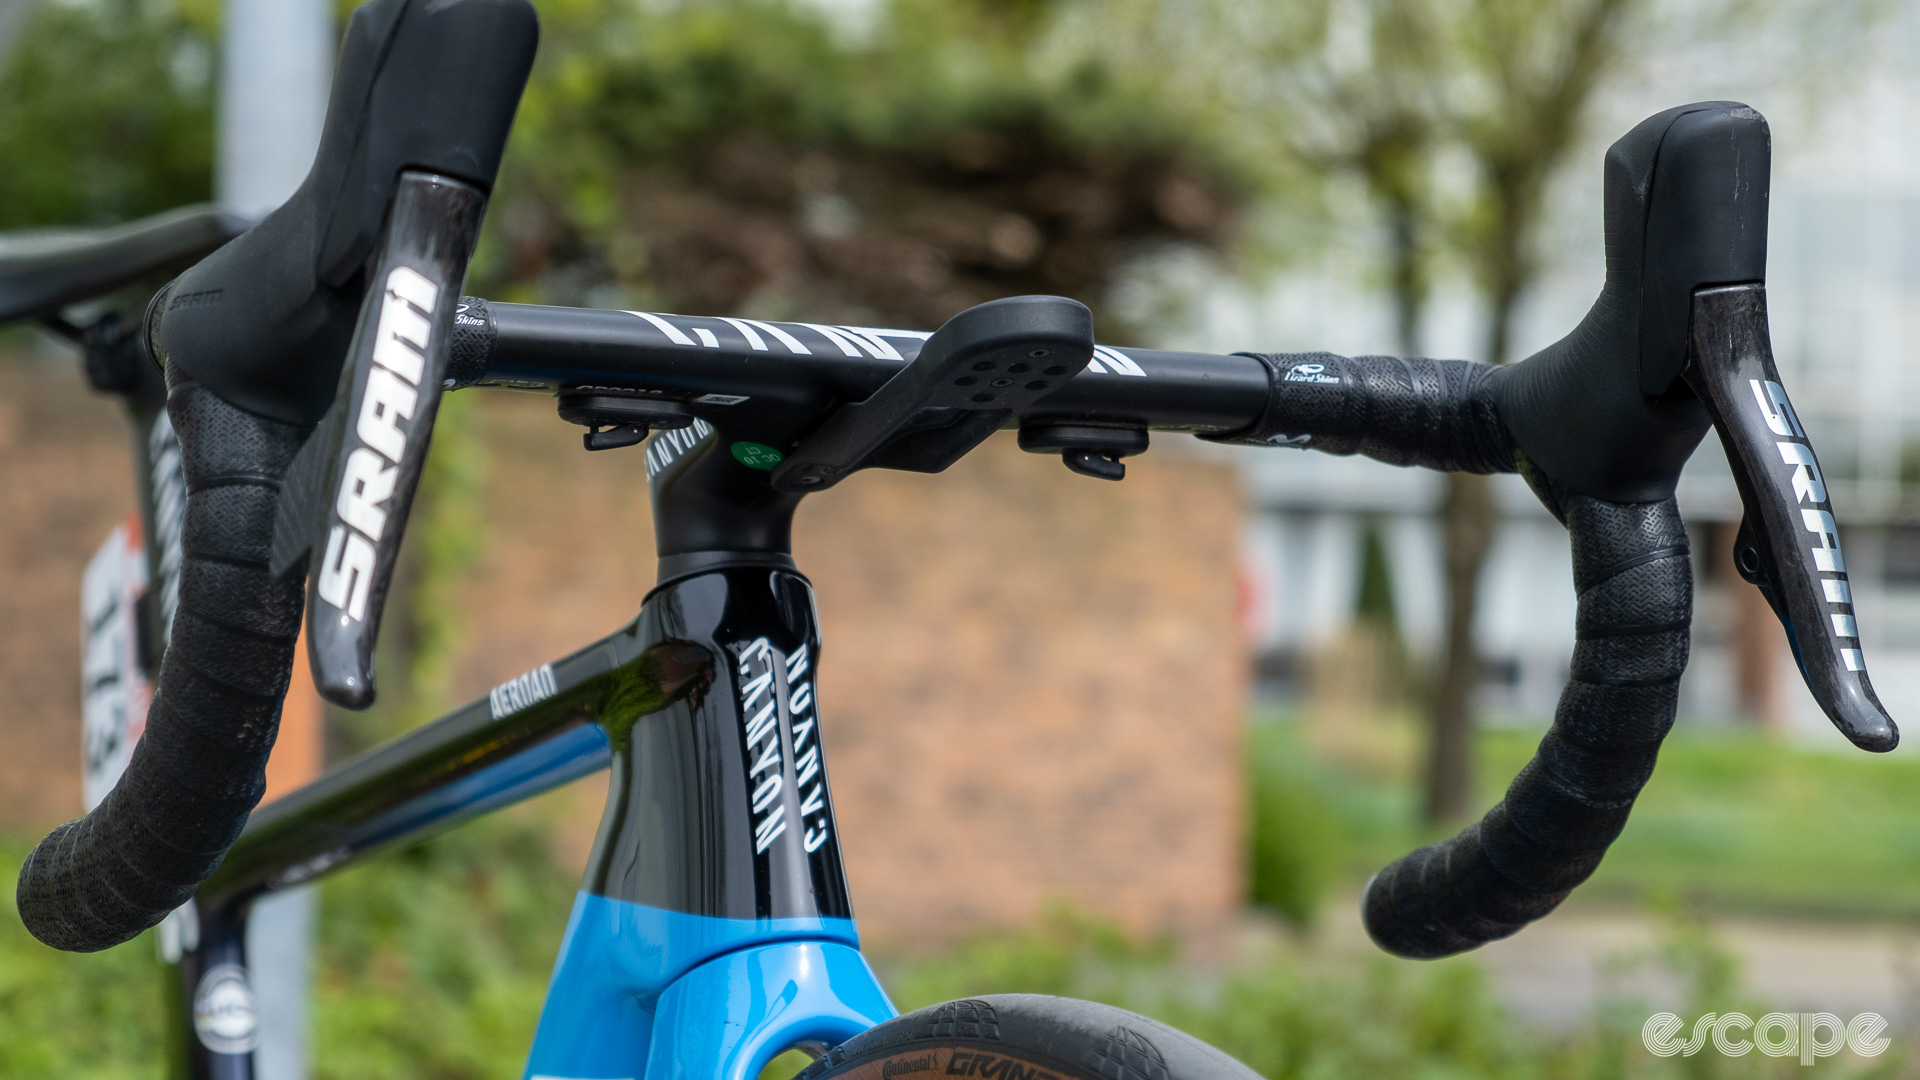 The image shows the underside of a handlebar 